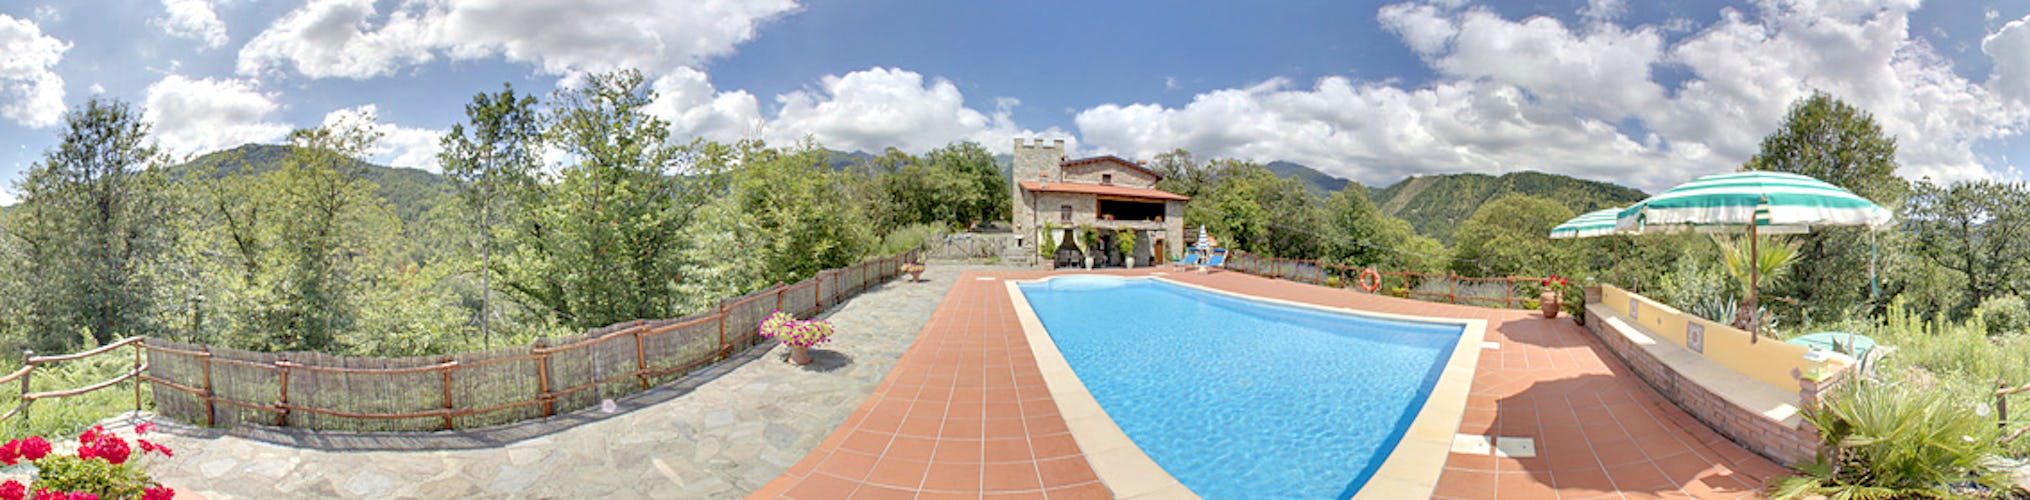 Silence and privacy prevade at the vacation villa rental Montecastello